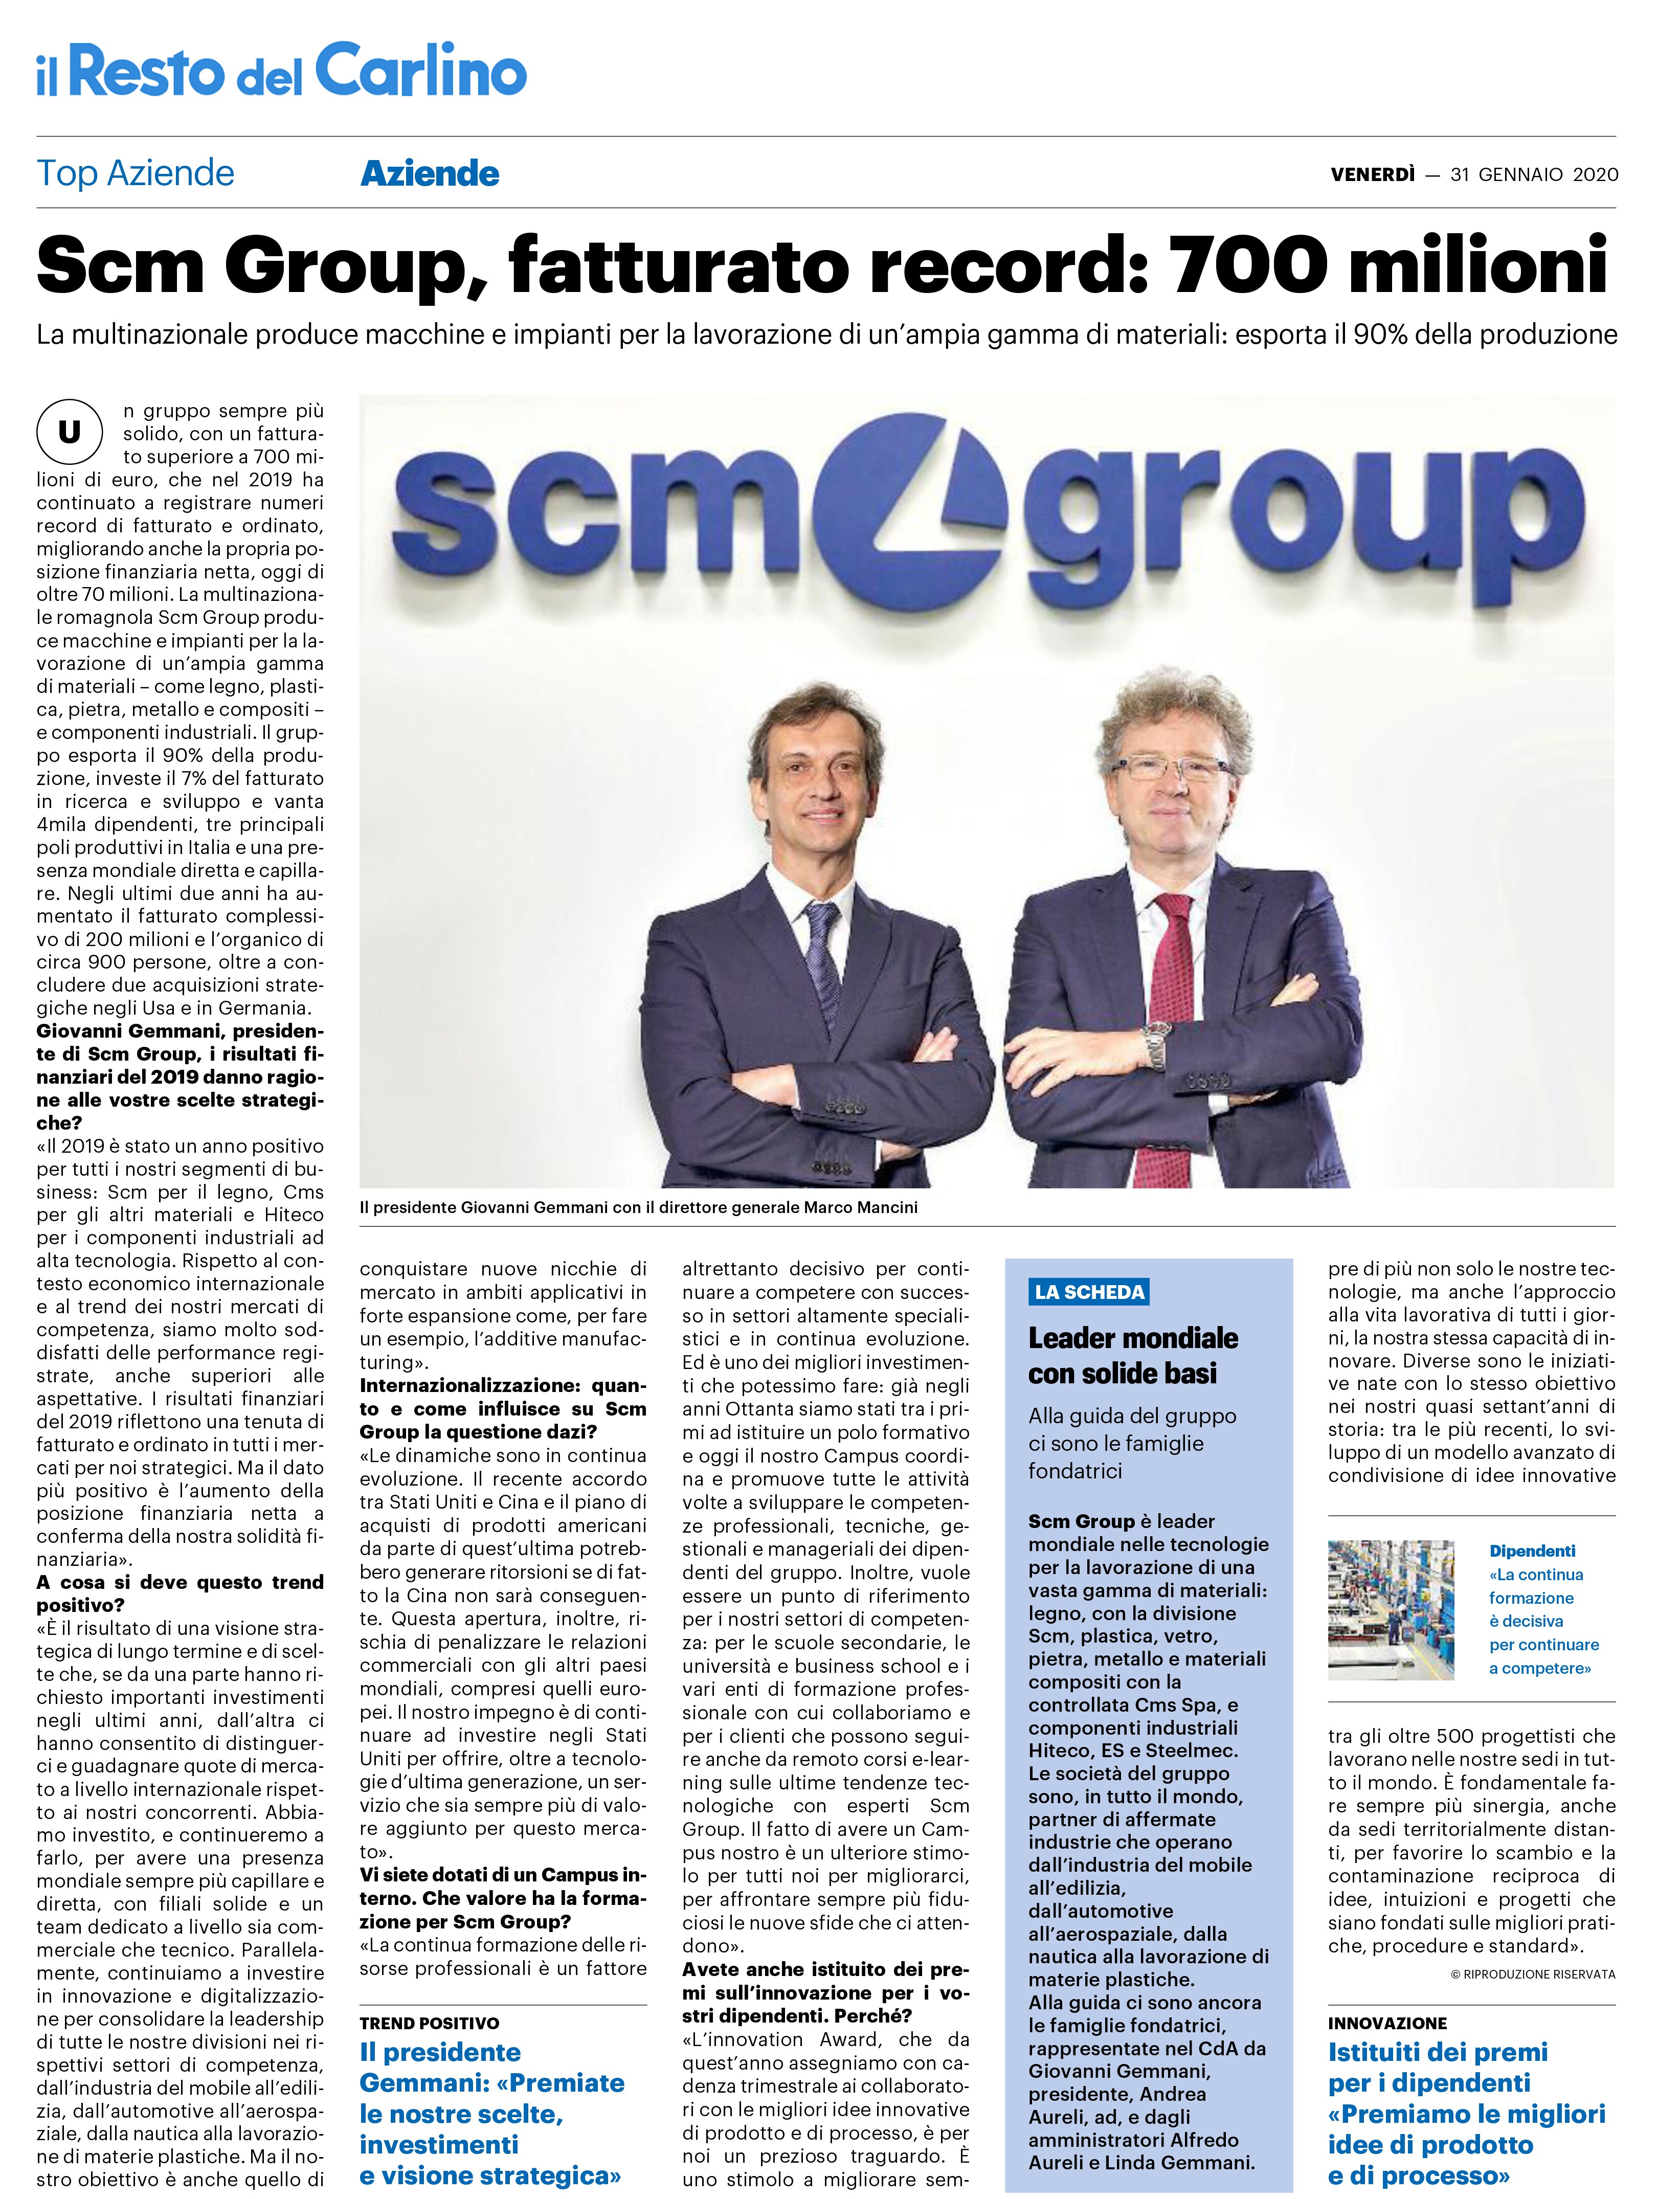 Scm Group, record turnover of 700 million. The interview with